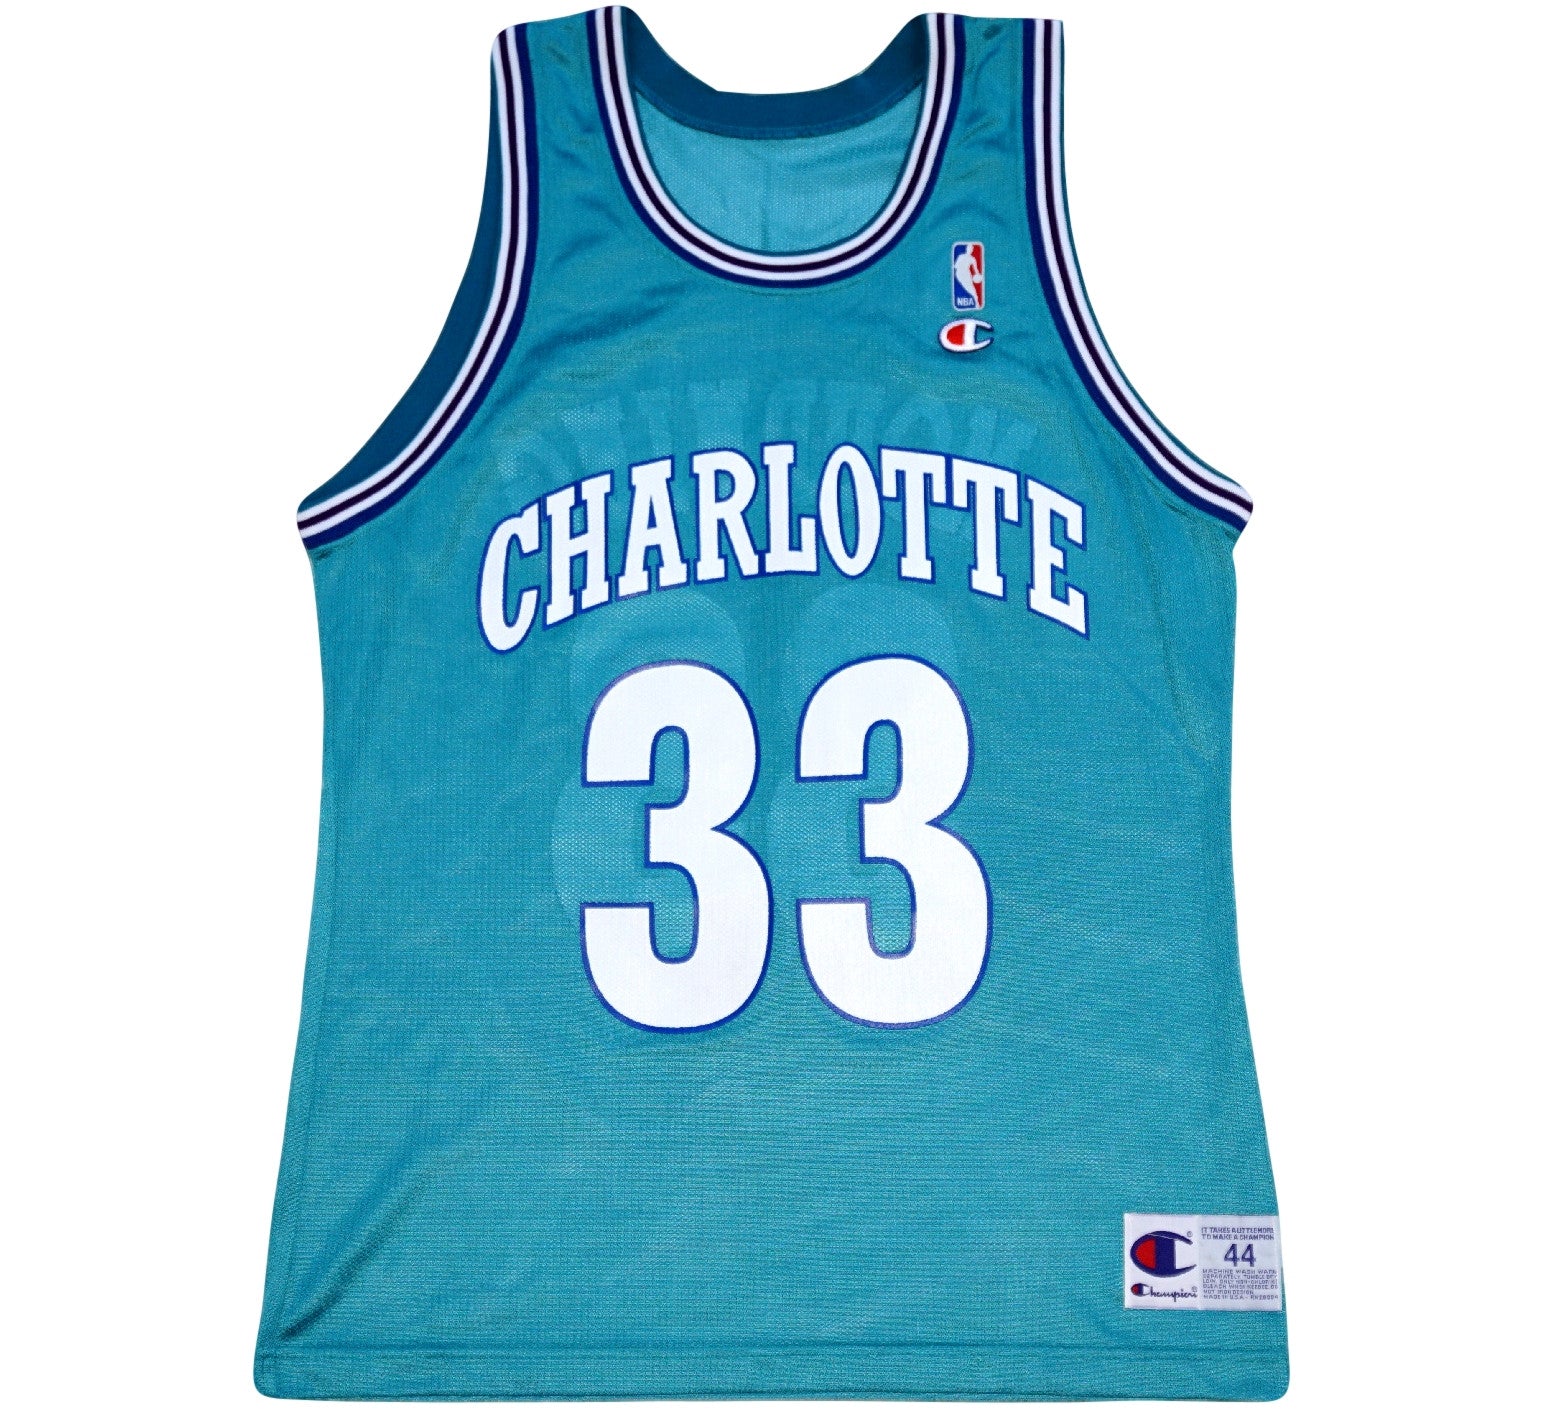 mourning hornets jersey